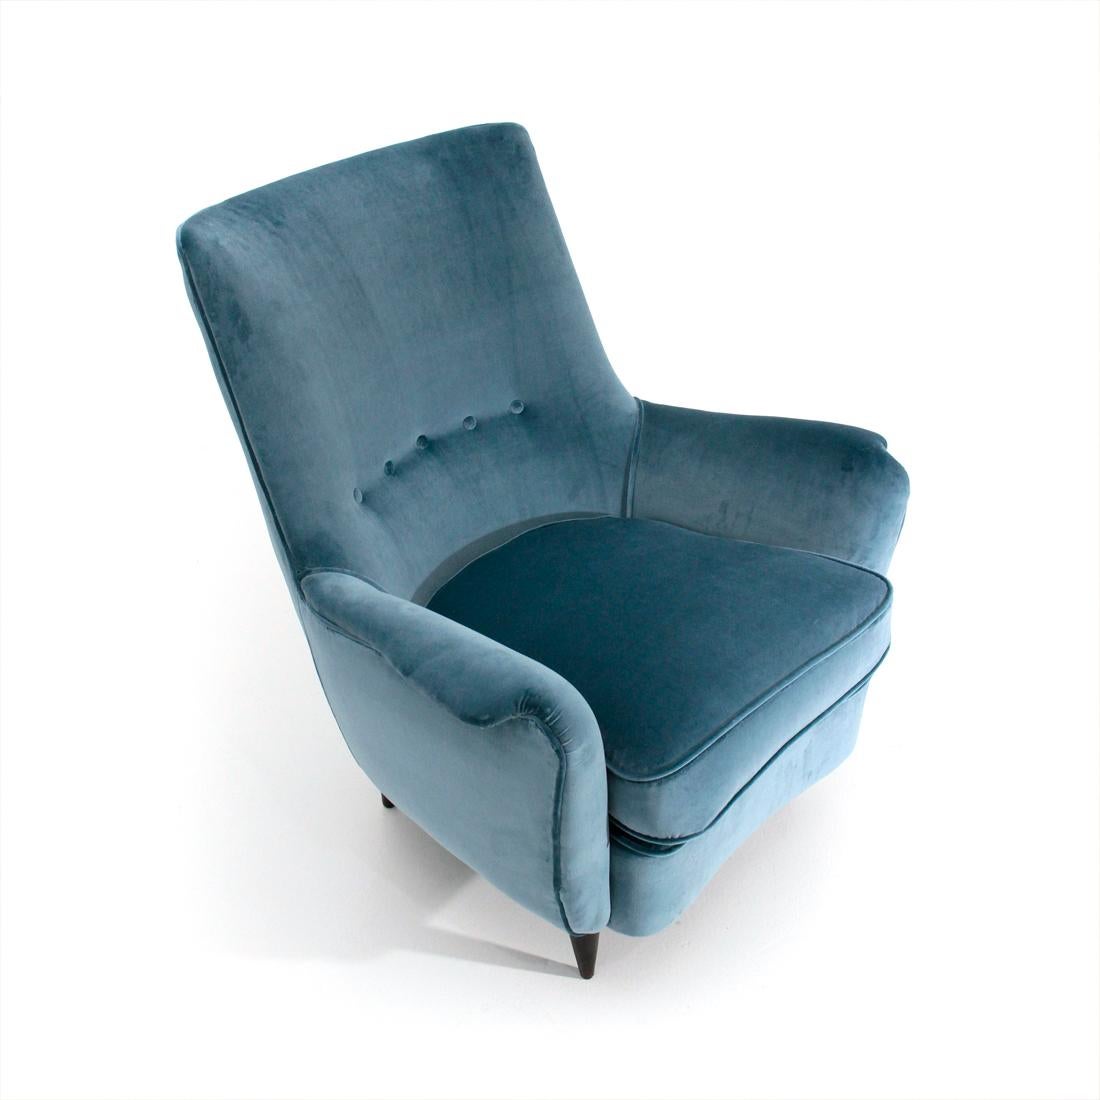 Italian manufacture armchair produced in the 1950s.
Wooden frame padded and lined with new light blue velvet fabric.
Seat with padded cushion and removable cover.
Stitched back with buttons.
Legs in conical shaped wood, painted in brown.
Good